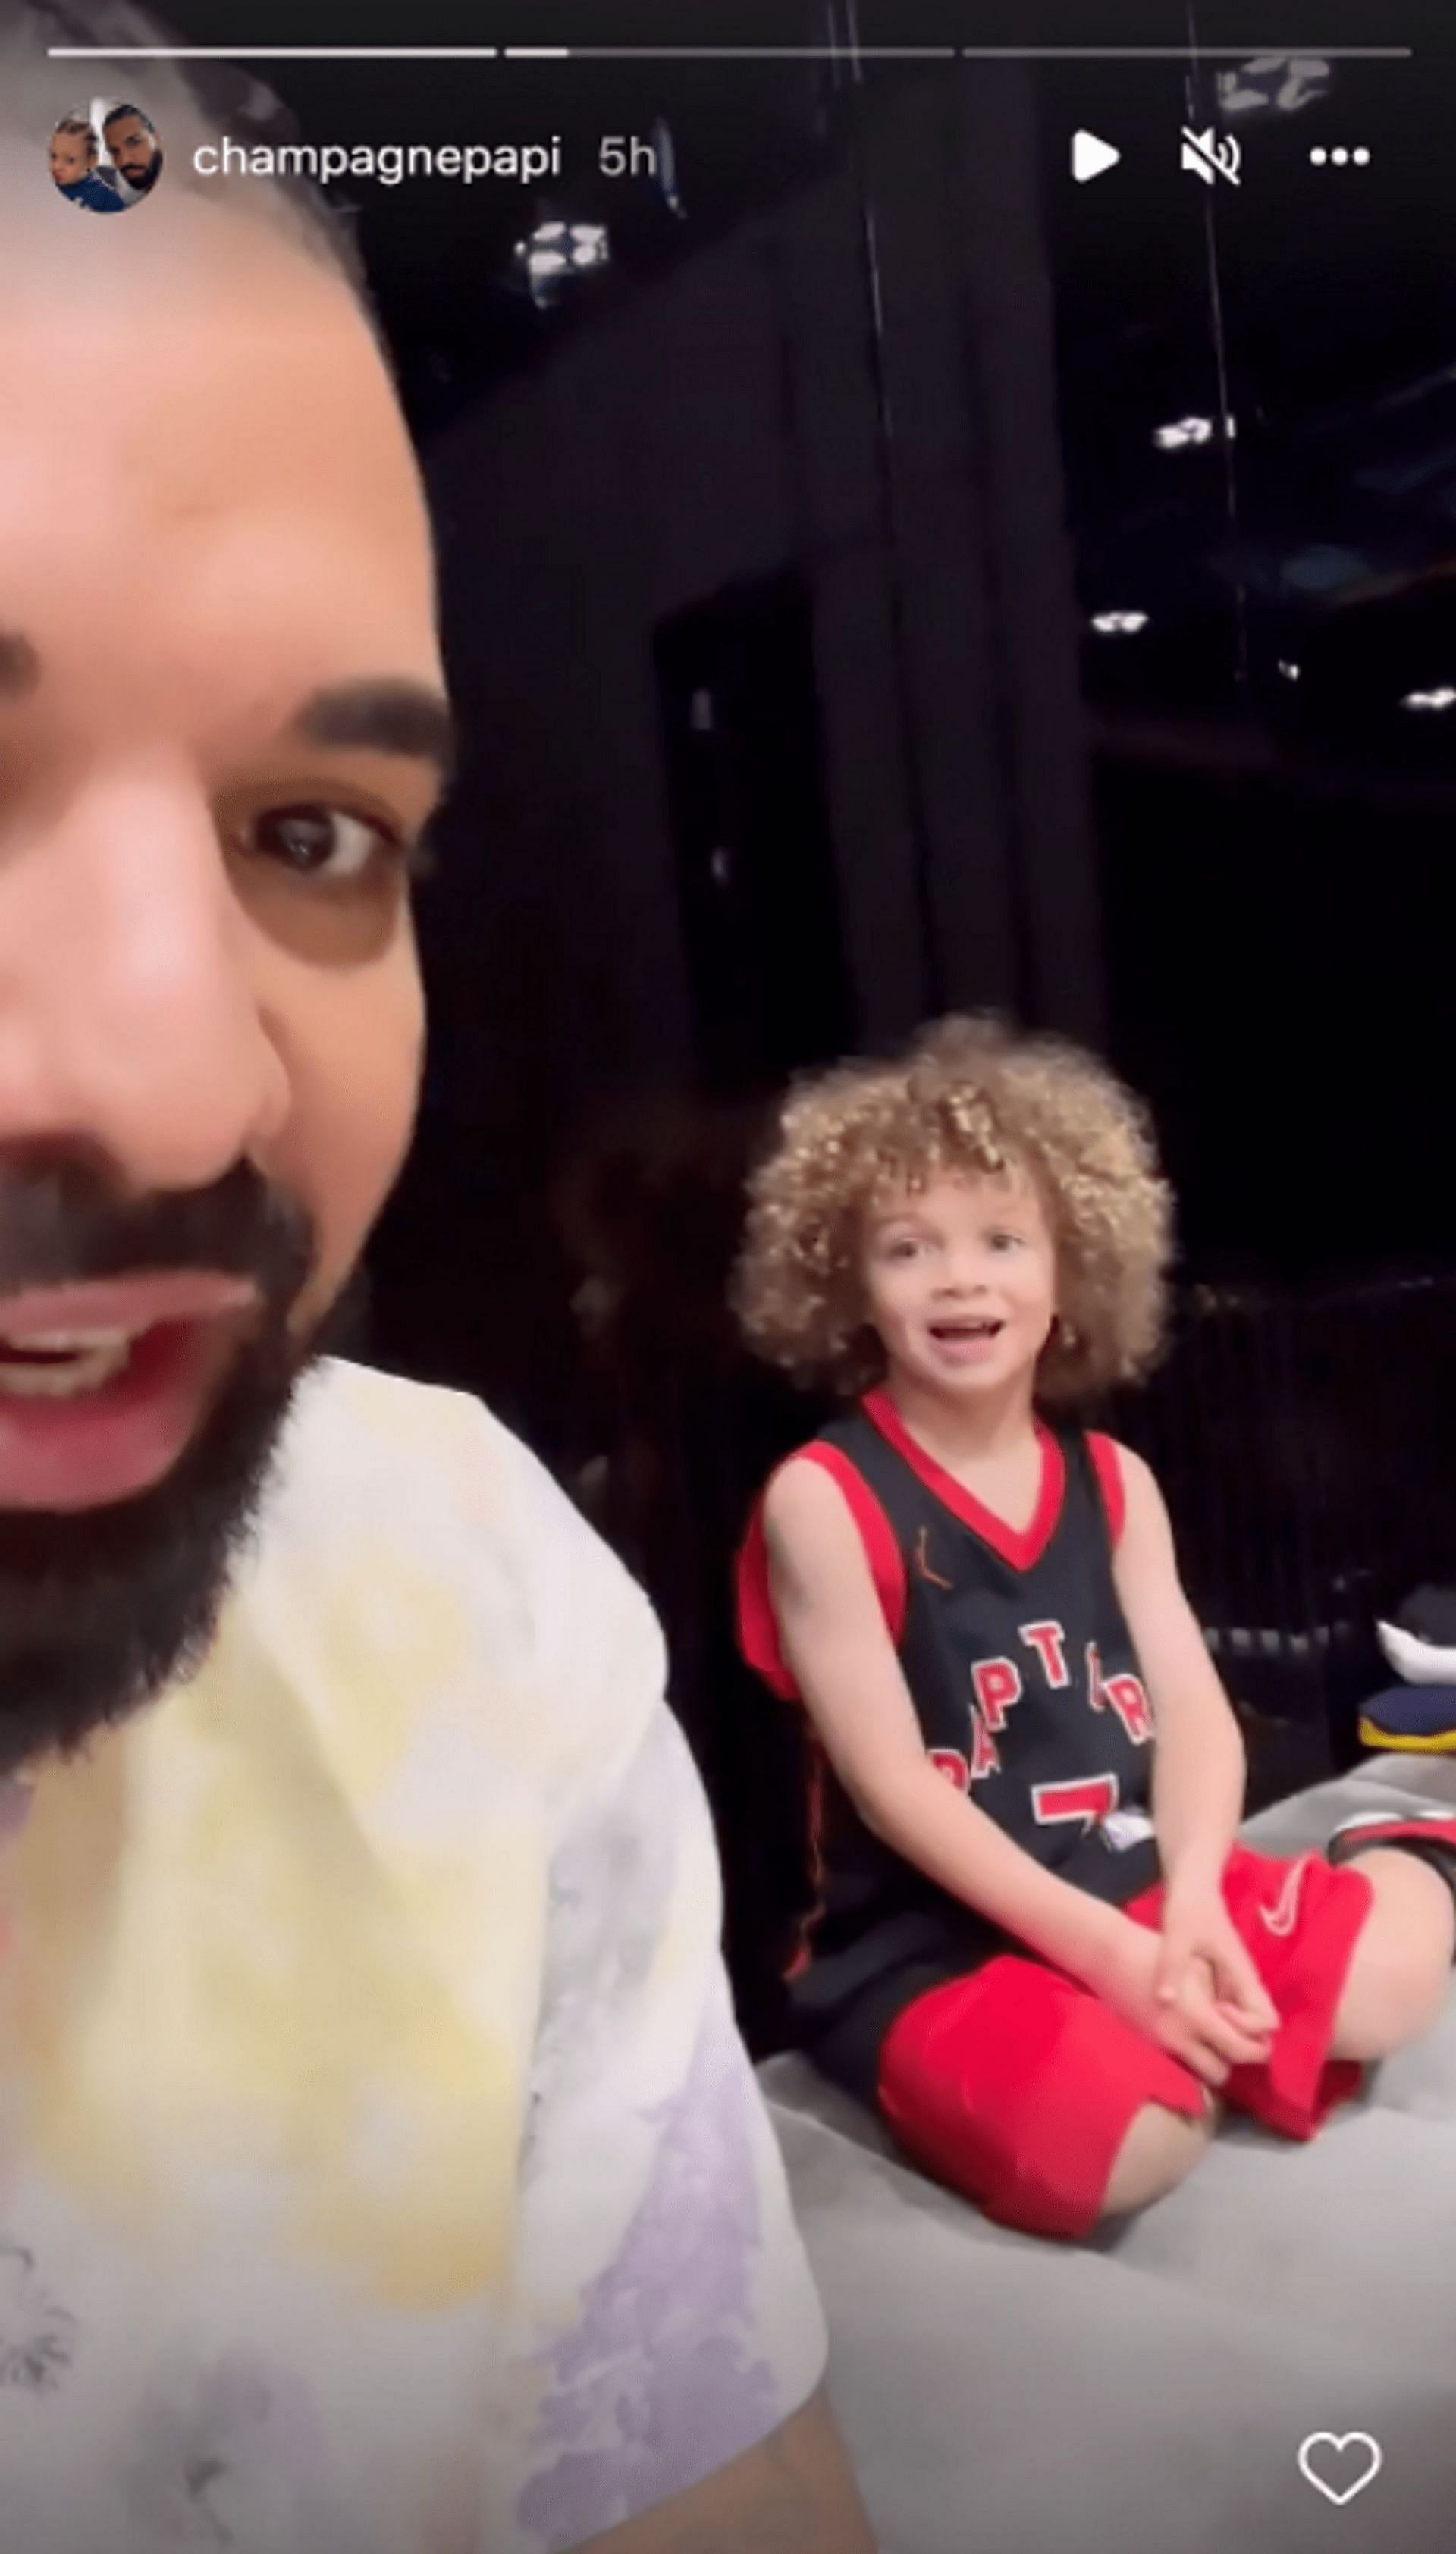 Drake posts video with son Adonis on his Instagram story (Image via champagnepapi/Instagram)